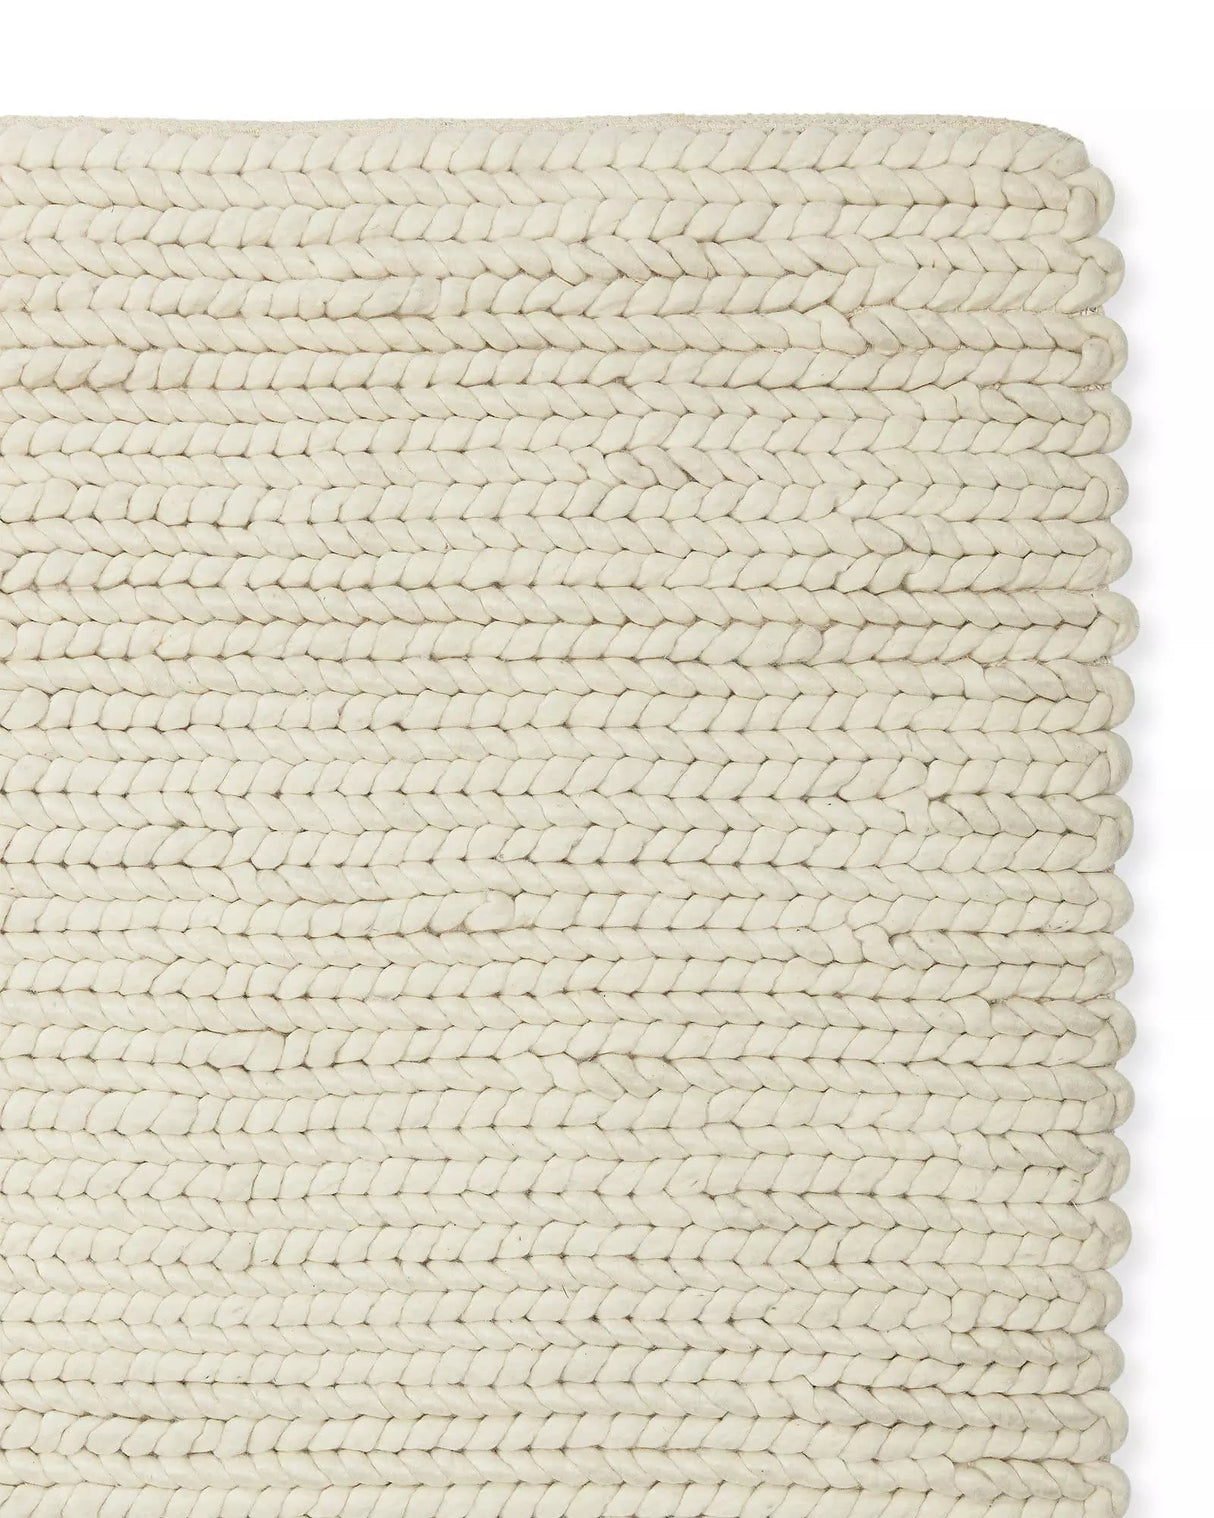 Serena and Lily 6X9 Braided Wool Rug - enliven mart